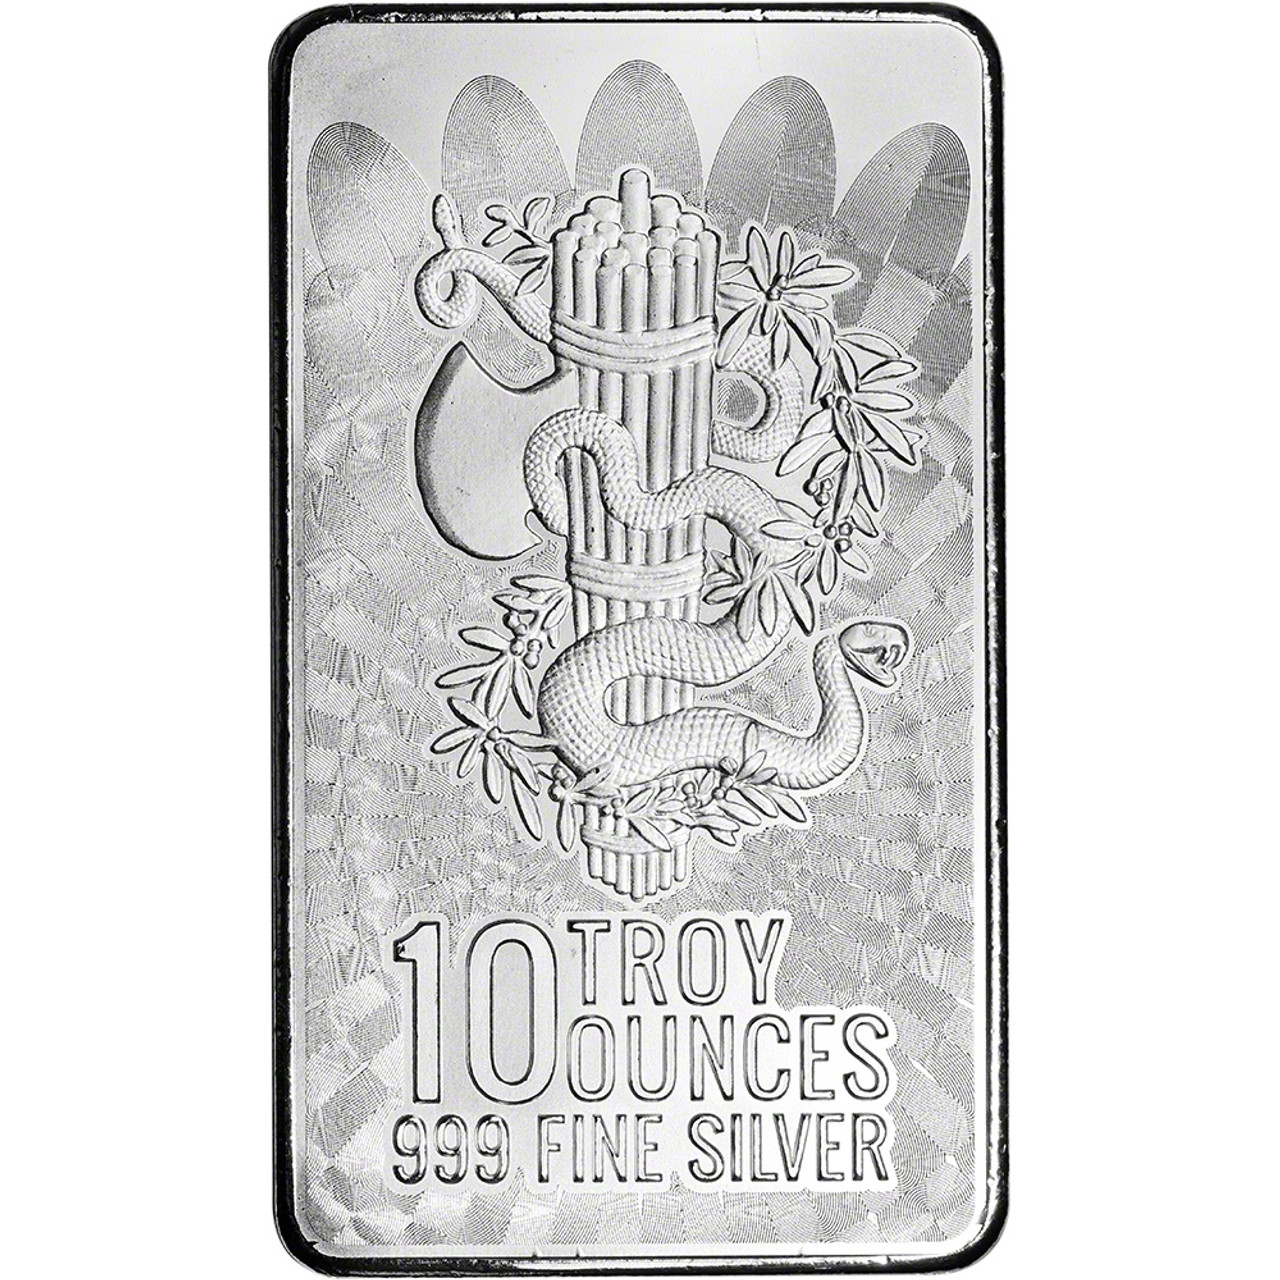 Buy Silver 1 oz Unity and Liberty Bar Online - Pure & Authentic